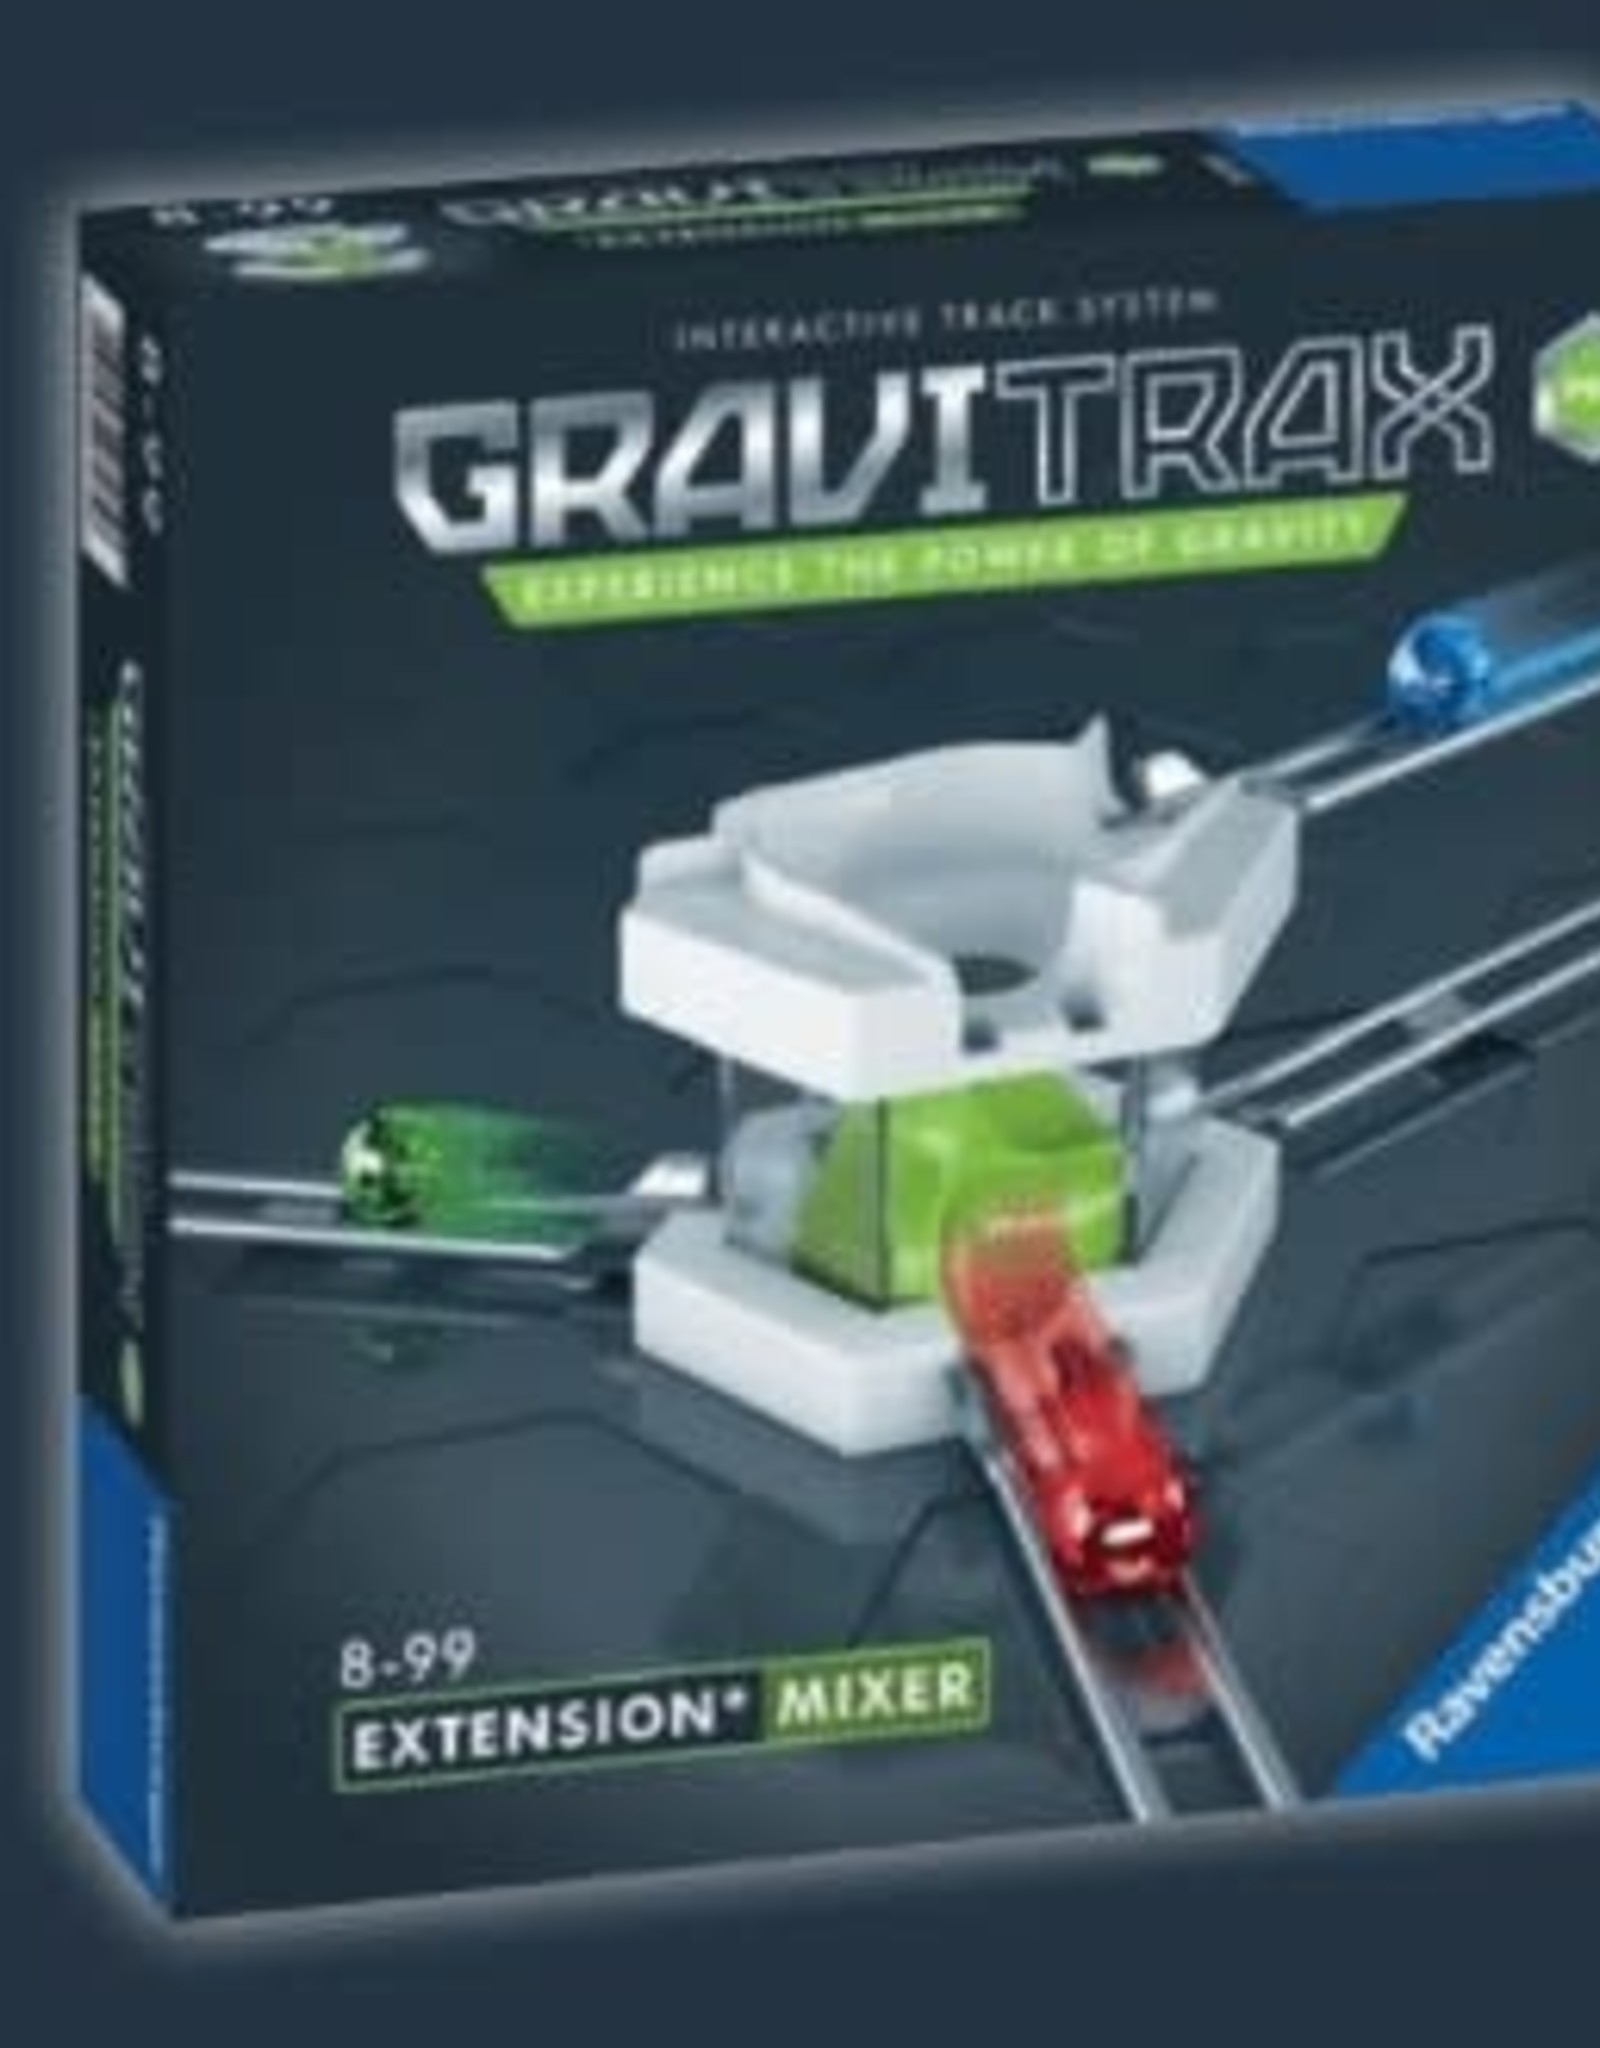 Gravitrax PRO: Mixer - Lets Play: Games & Toys